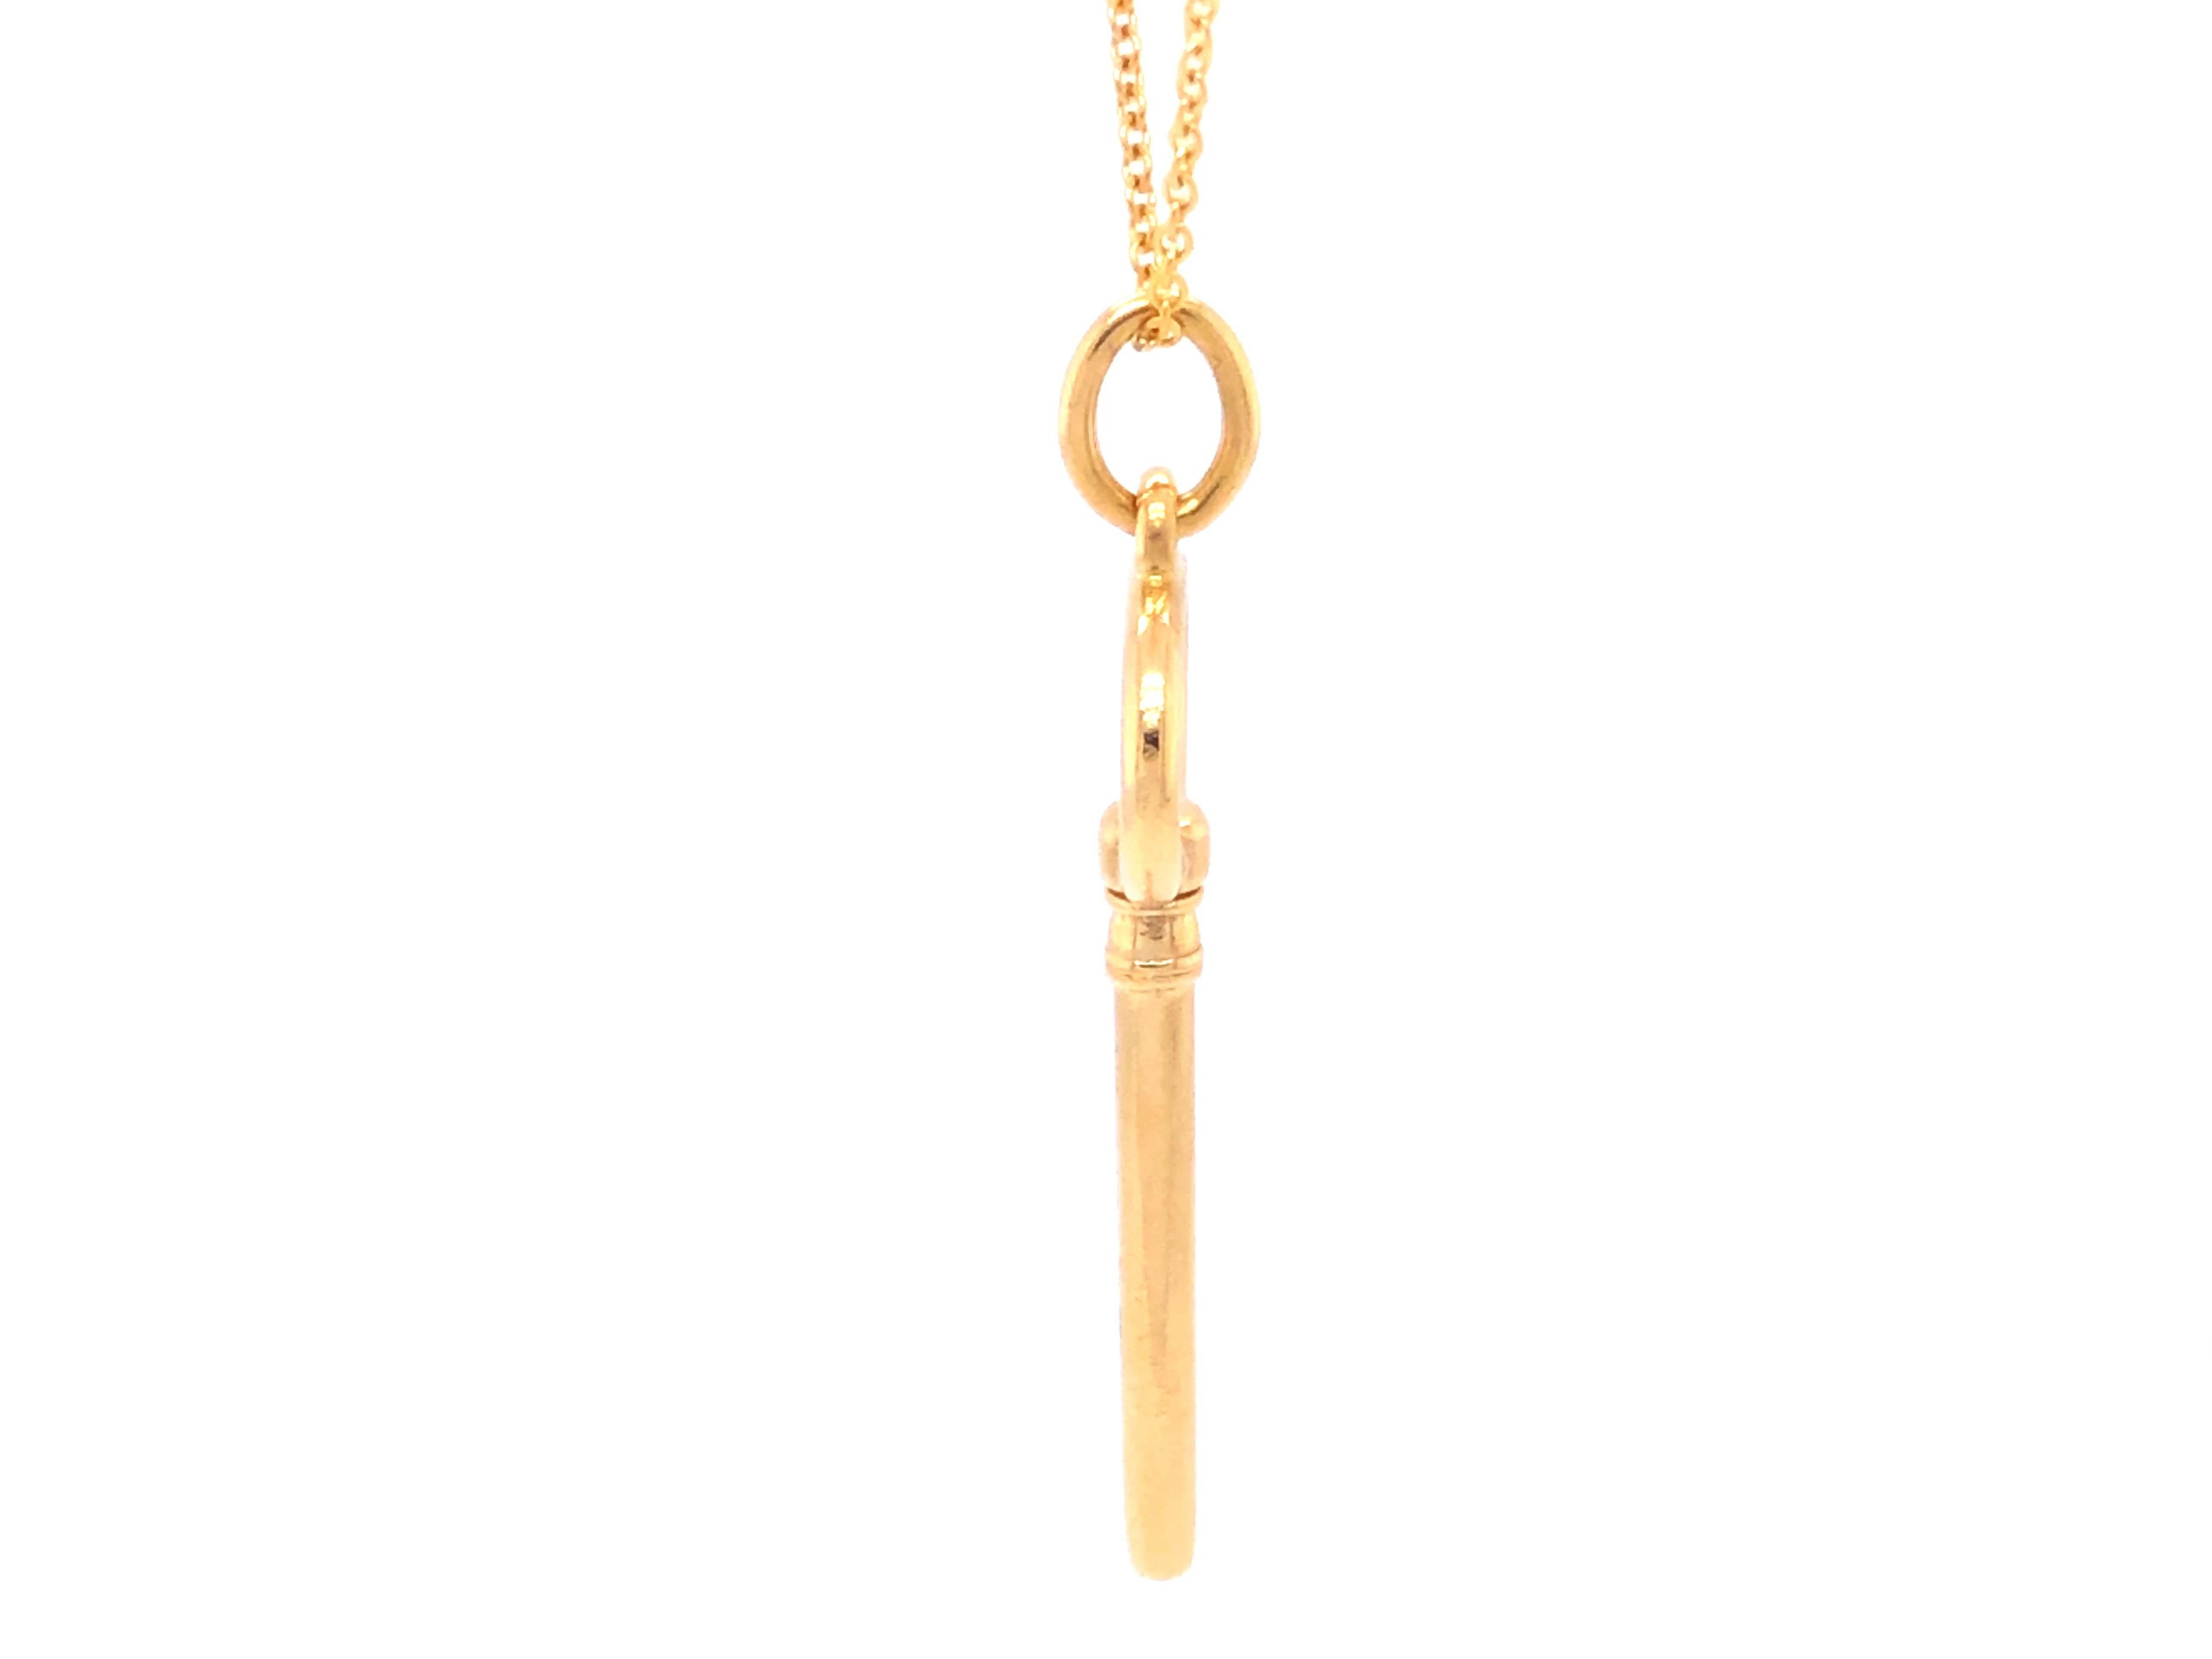 Women's or Men's Tiffany & Co. Oval Key Pendant and Chain, 18k Yellow Gold